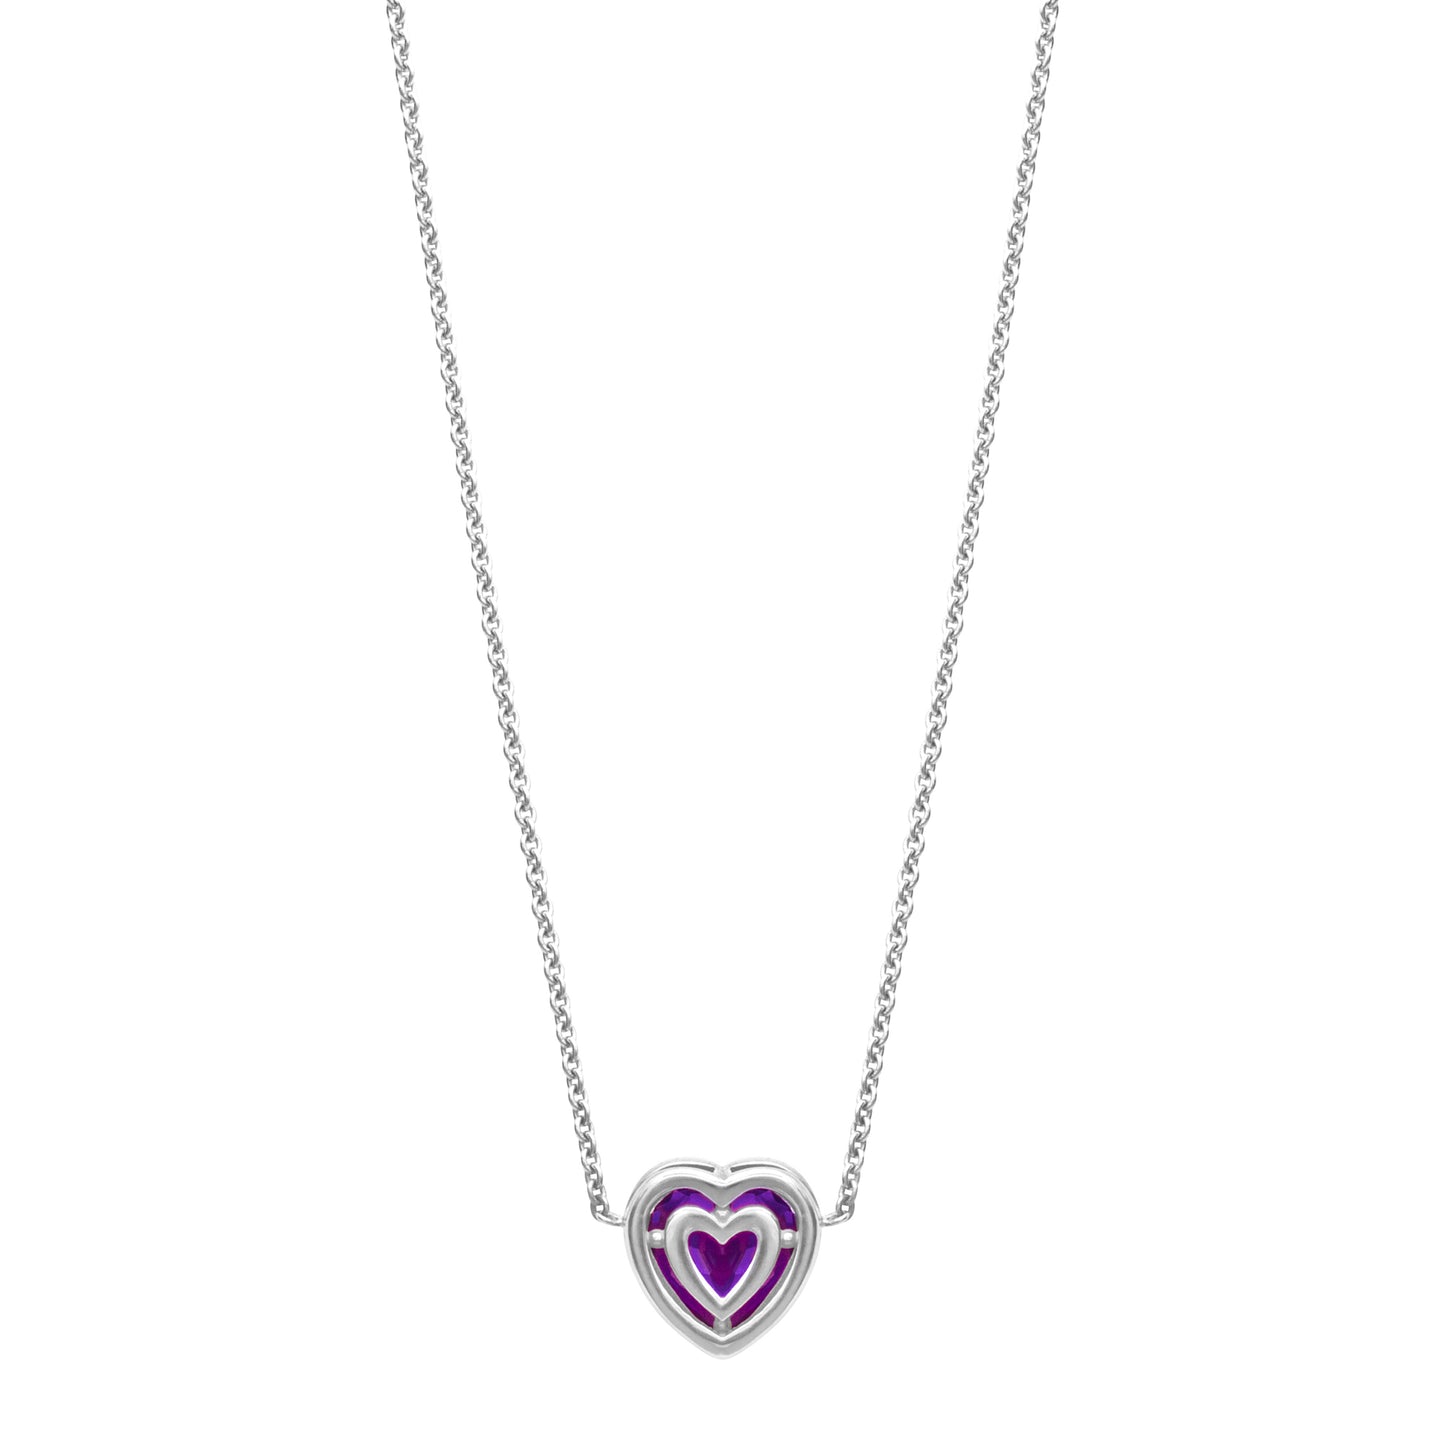 Bezel Heart Necklace with Amethyst